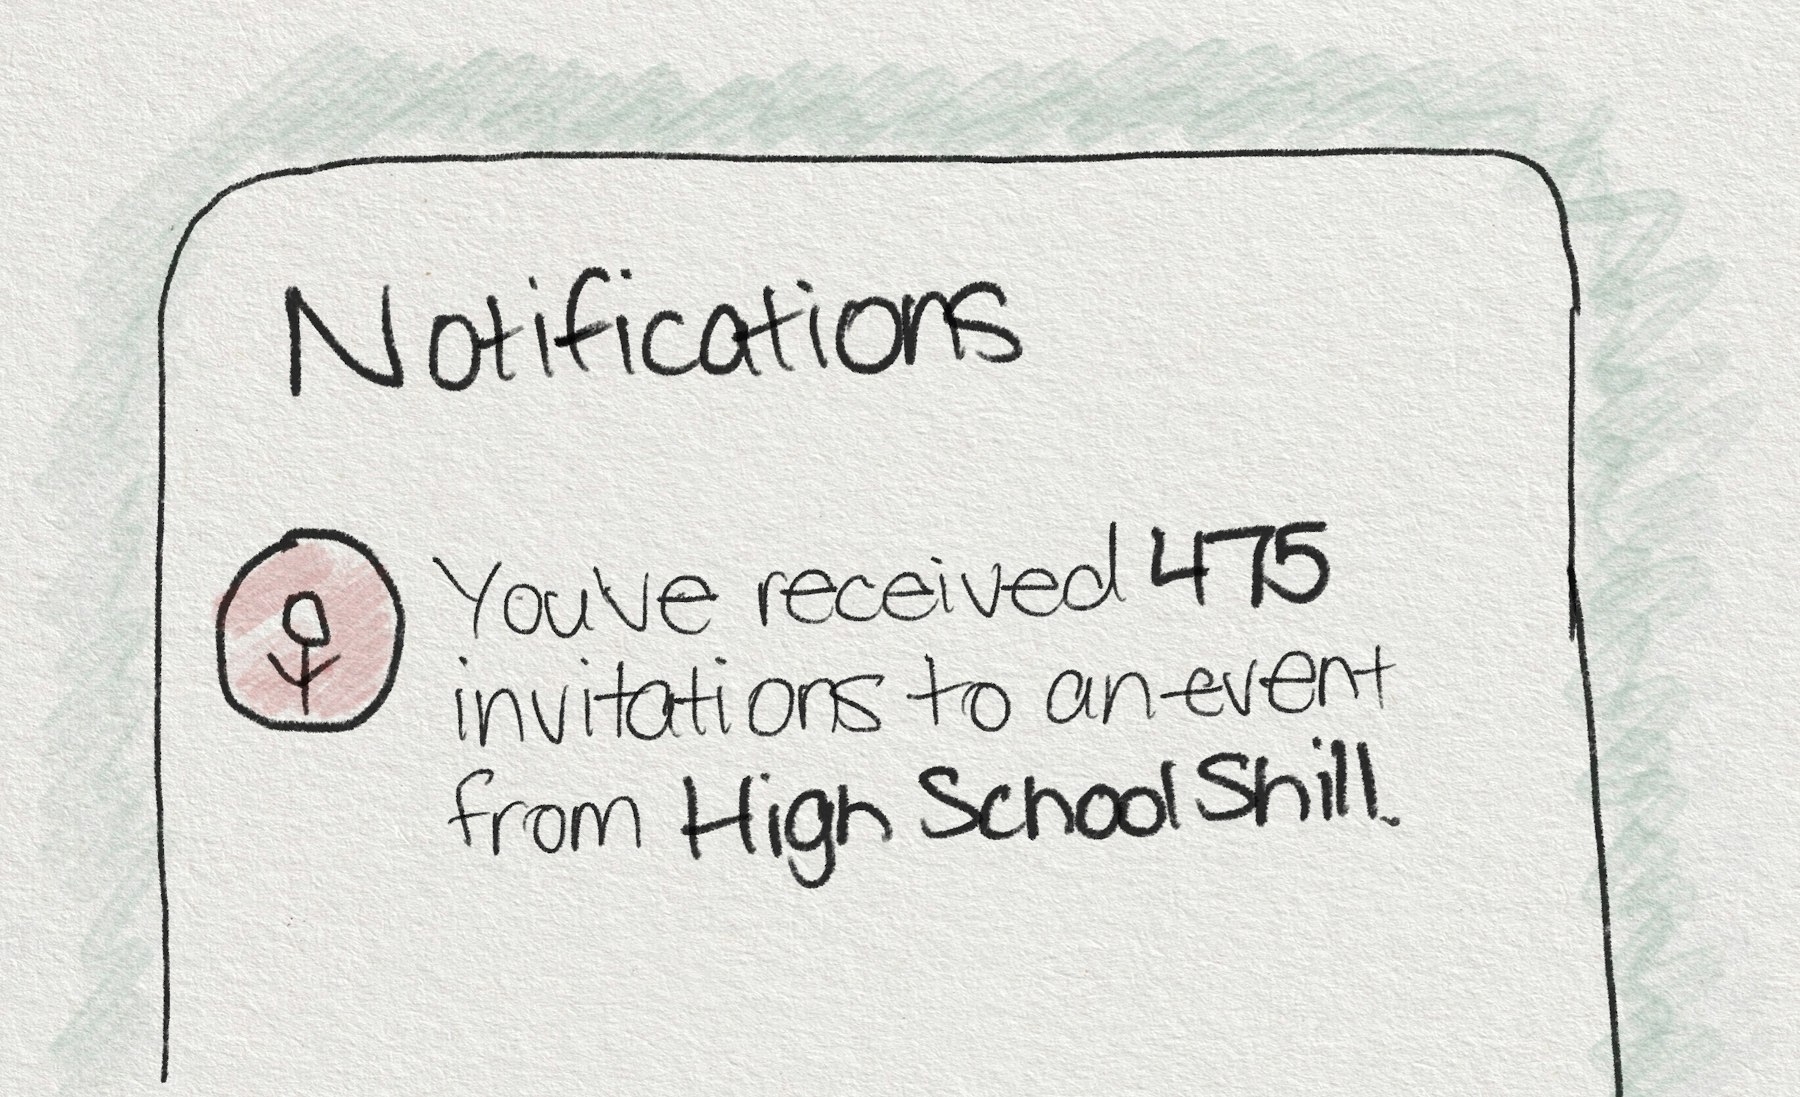 A notifications pop-up saying &ldquo;You&rsquo;ve received 475 invitations to an event from High School Shill.